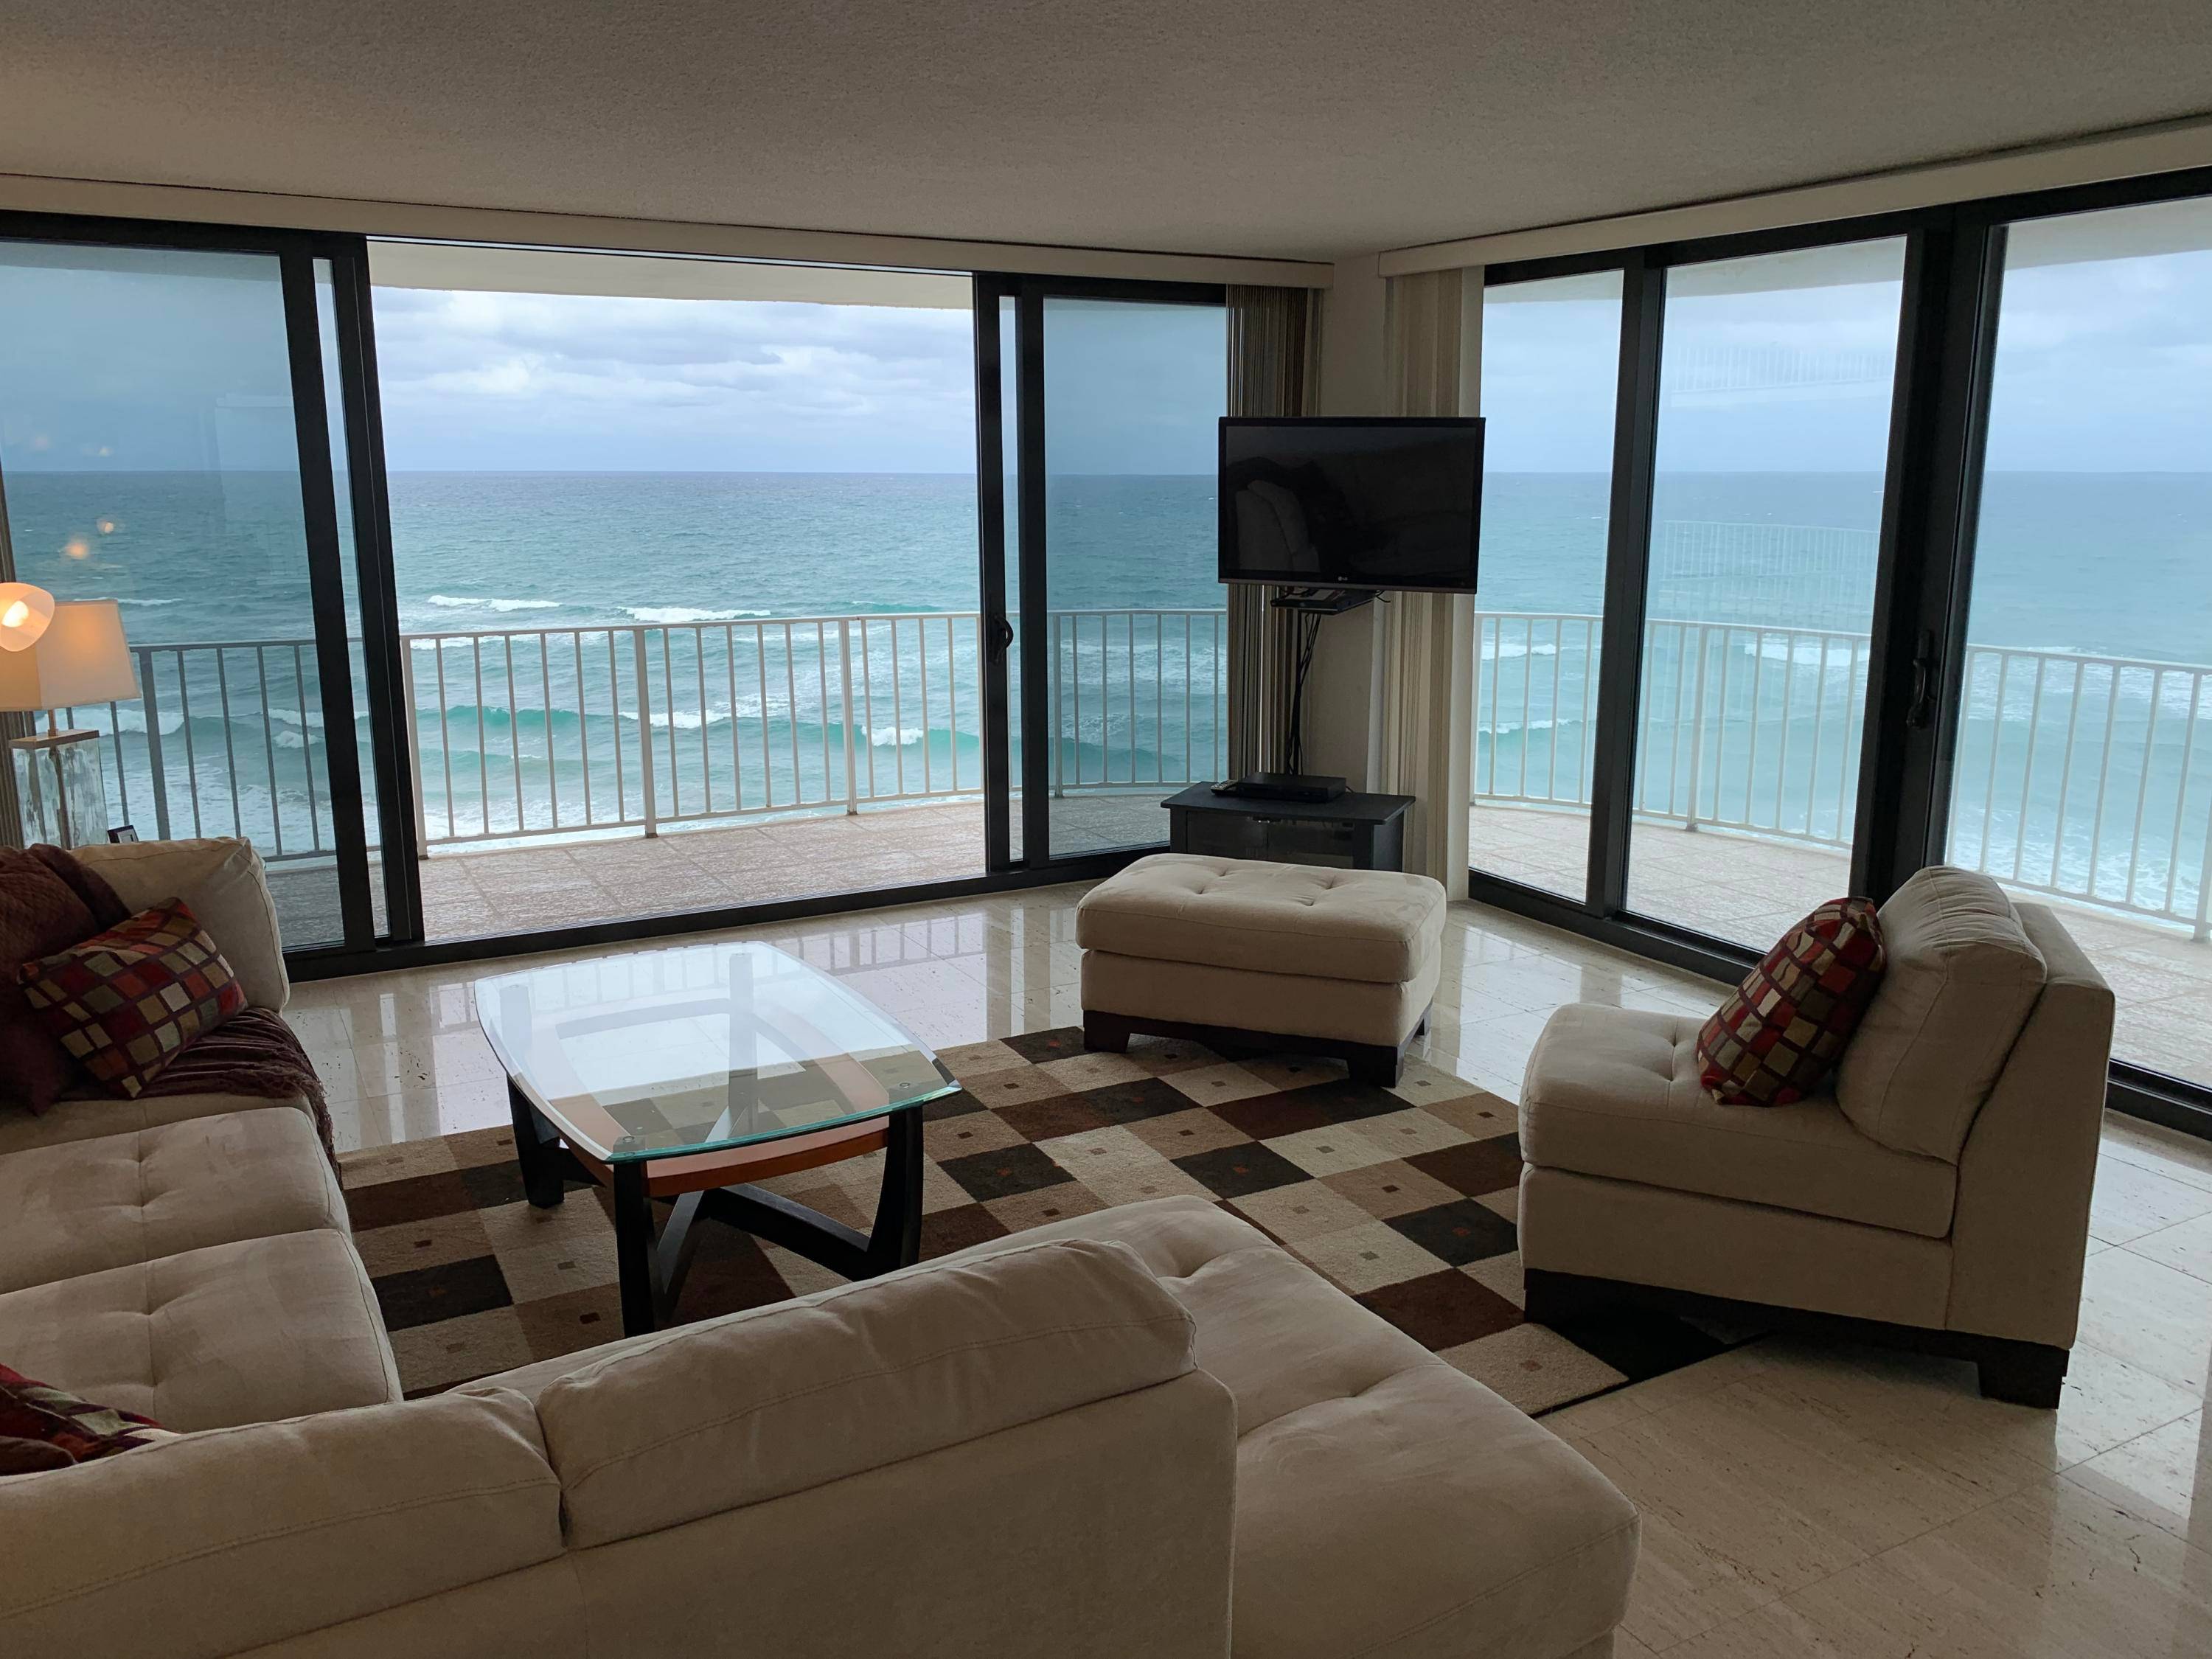 Direct Ocean Views from every room of the 2 bedroom 2 bath condo with 1740 sq ft under ac.